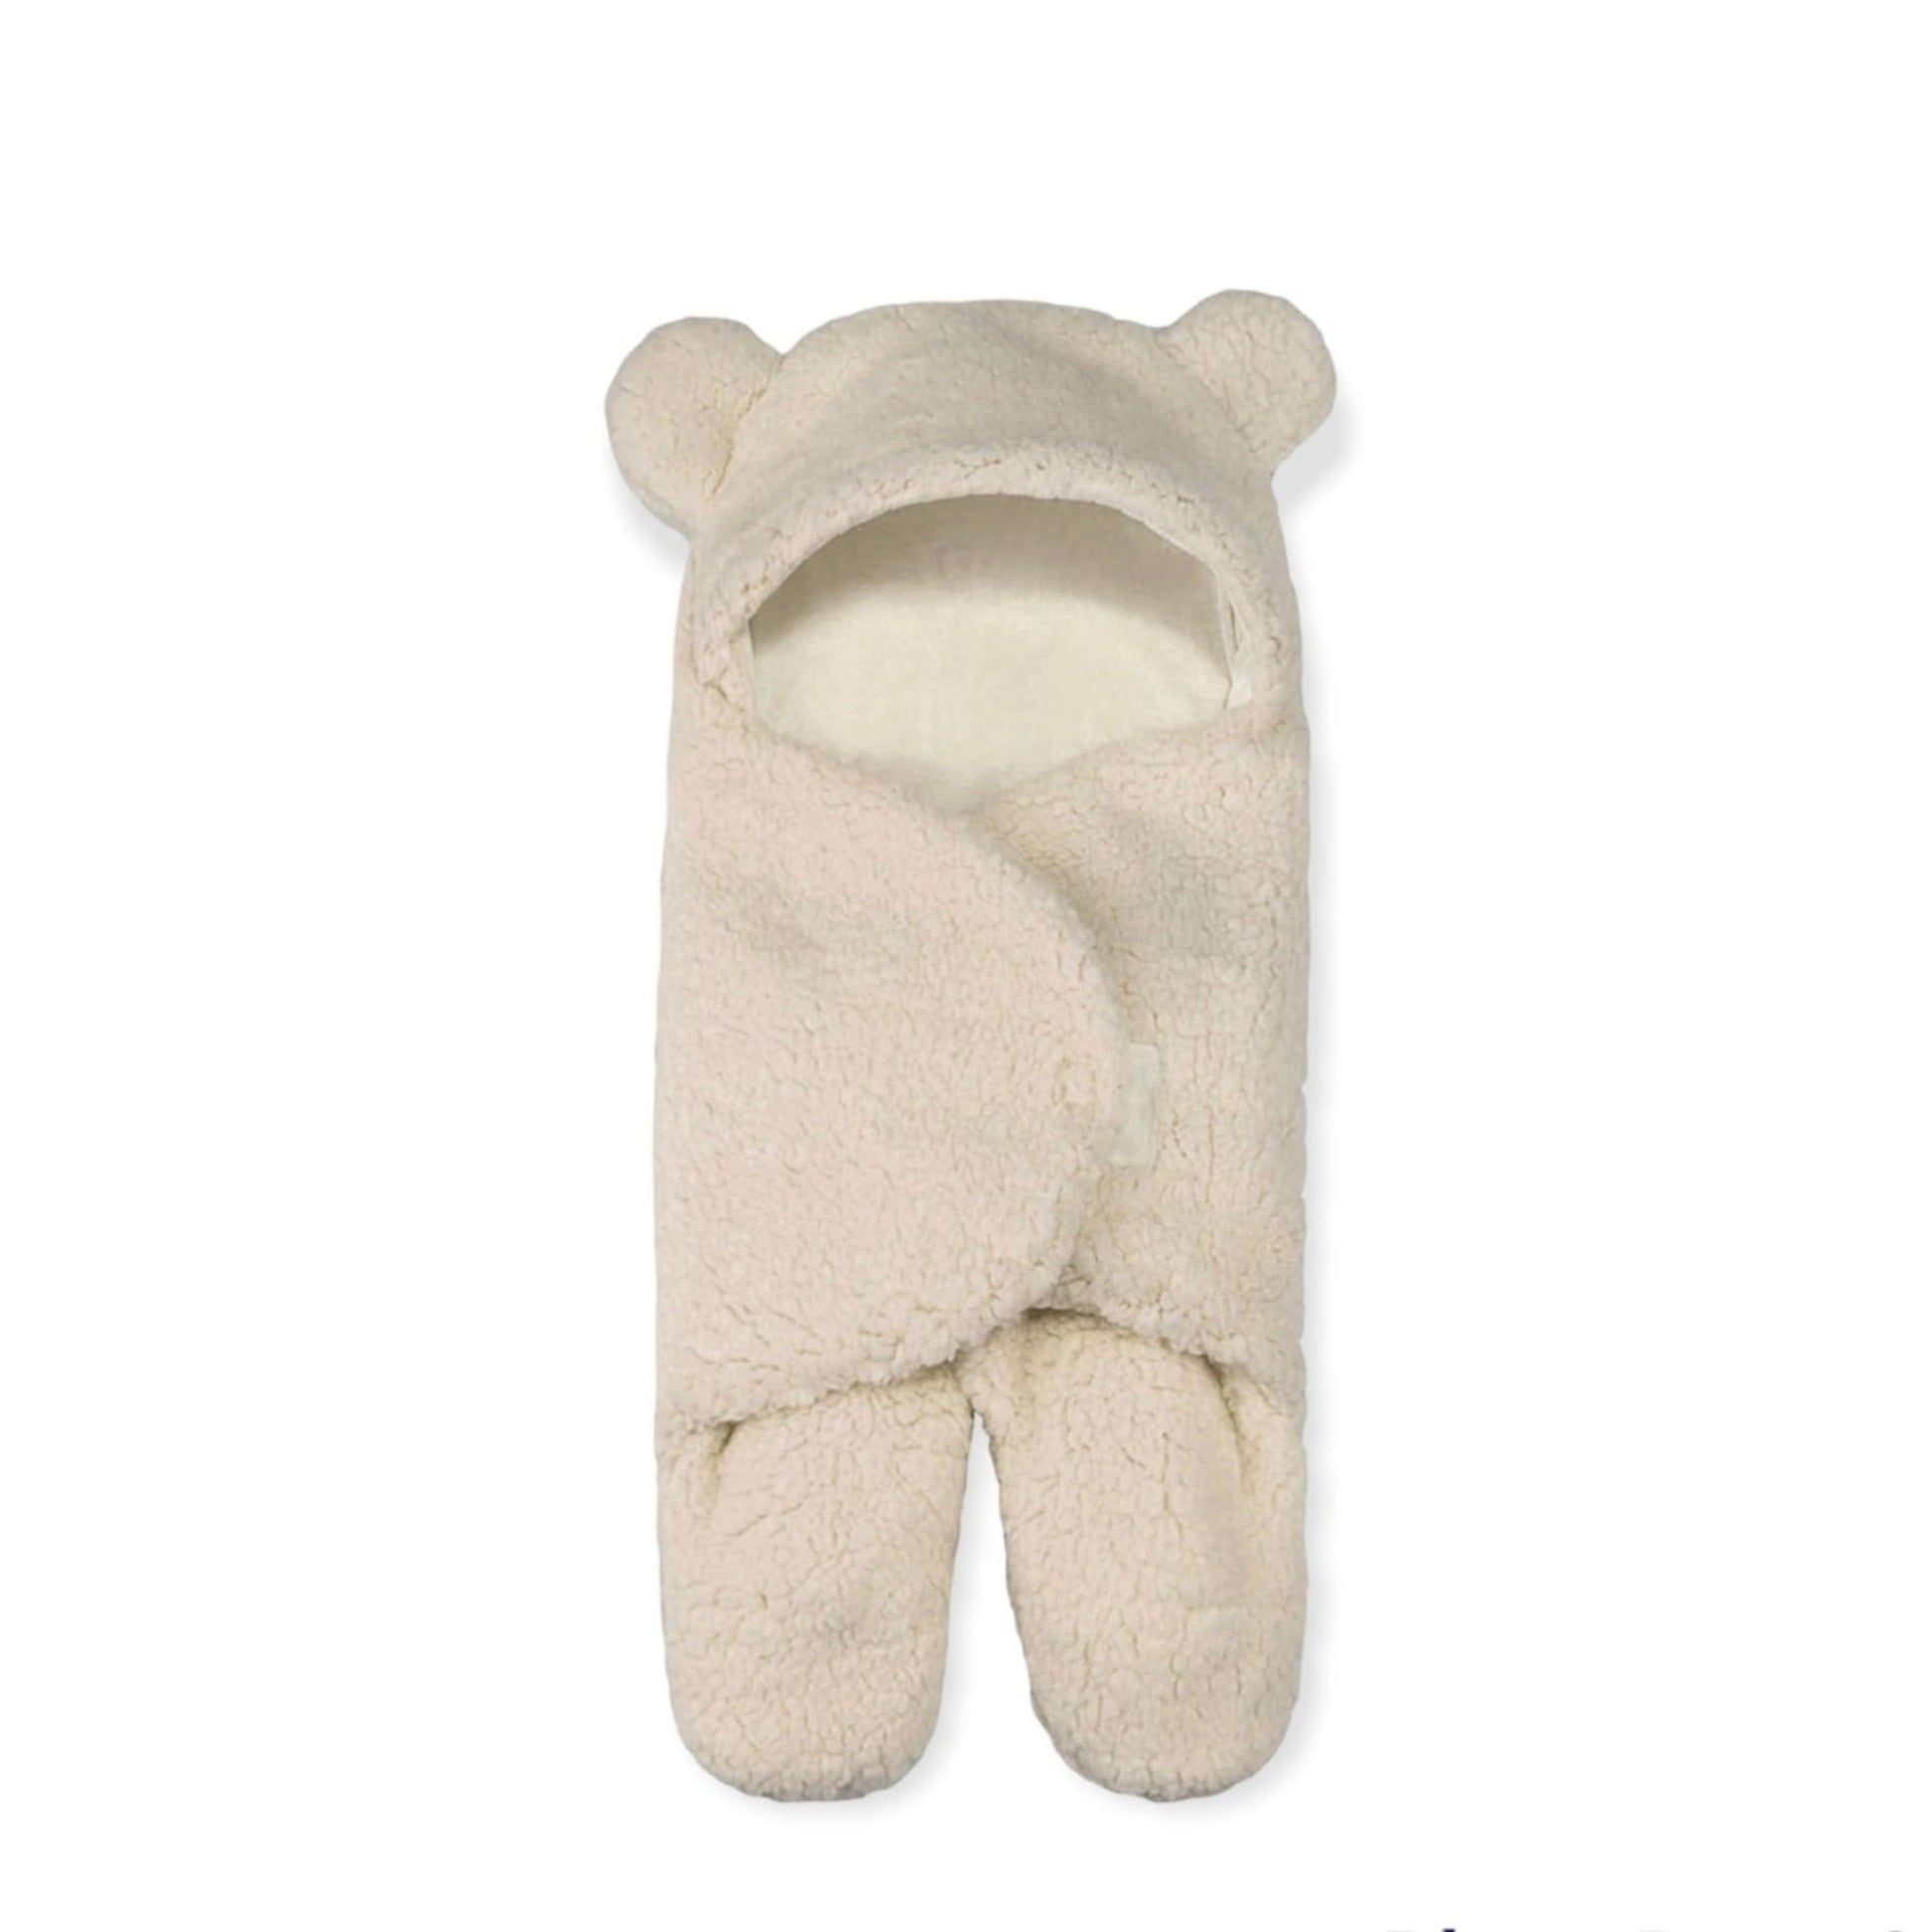 Beige baby sleeping bag and swaddle for winter - hunny bubba kids